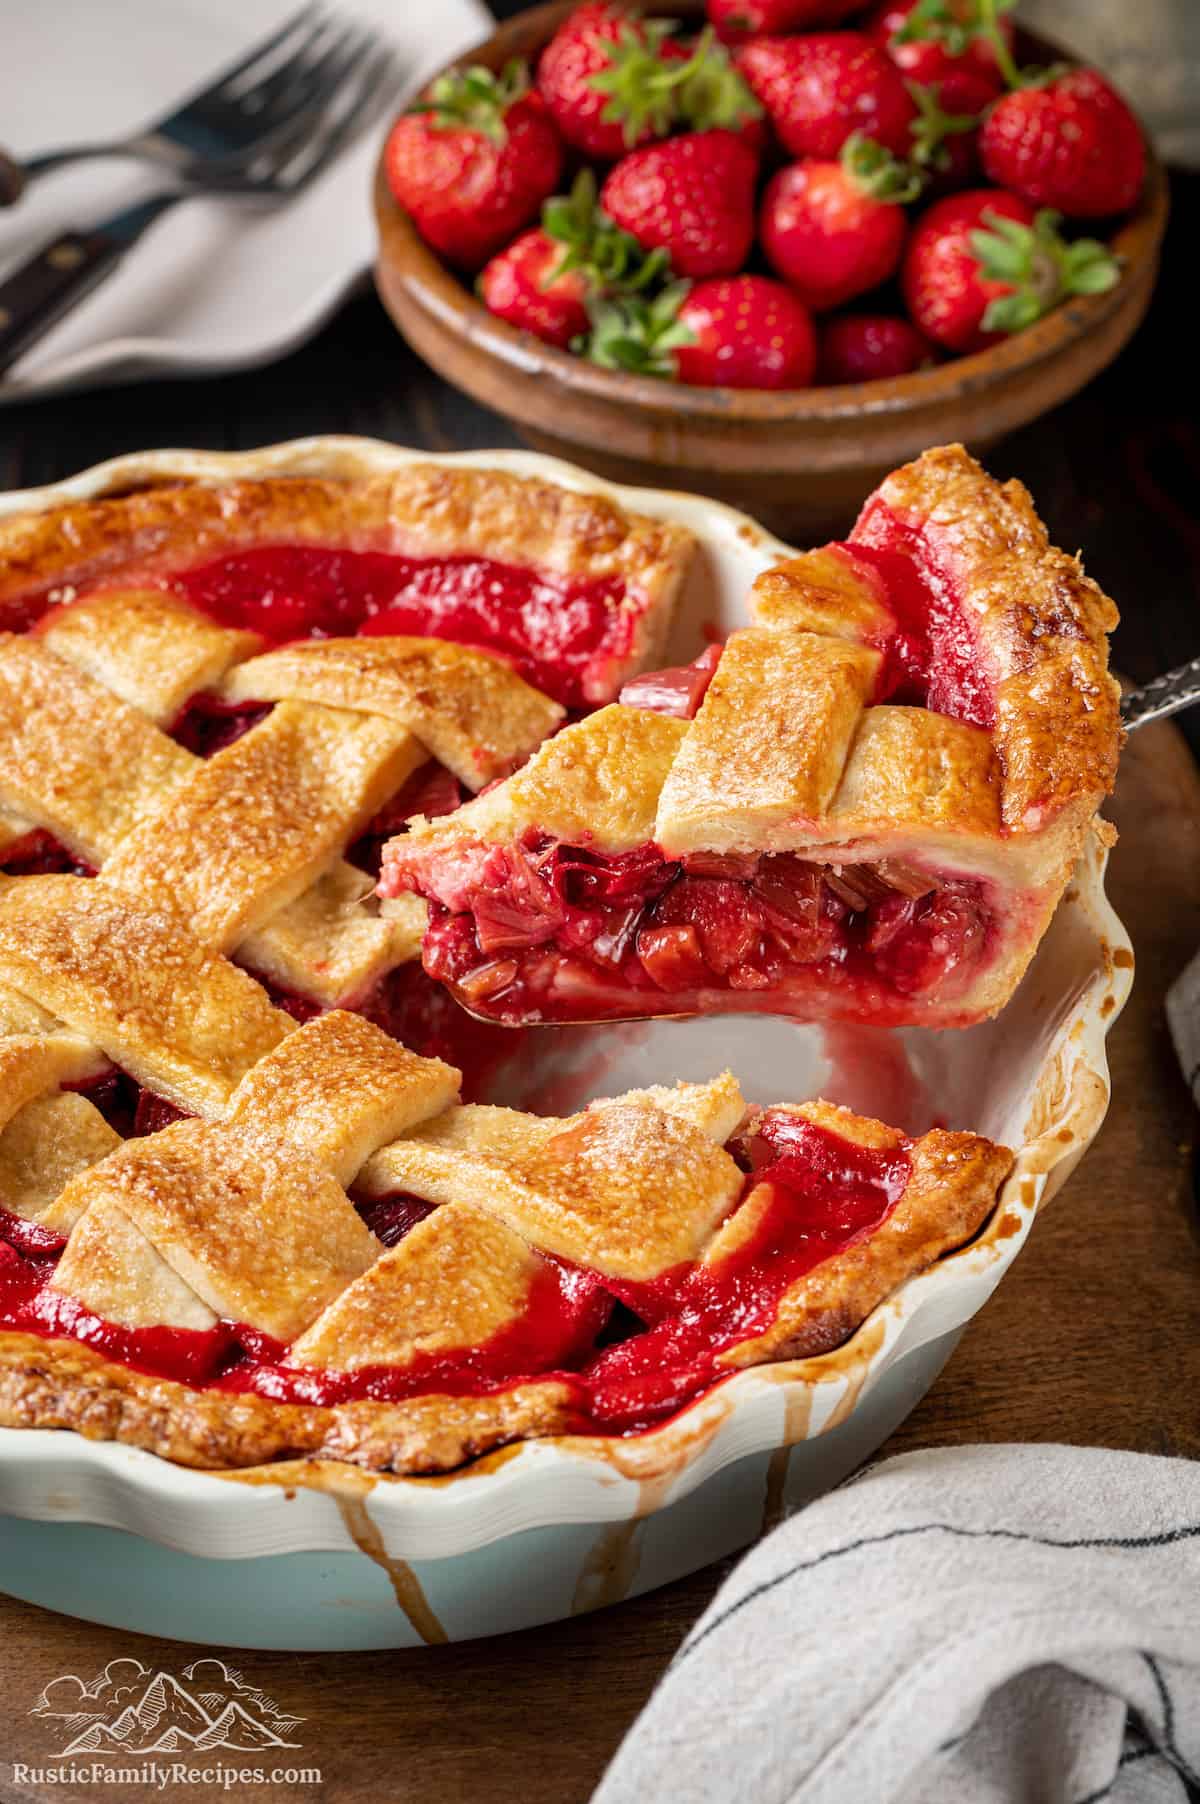 A slice of strawberry rhubarb pie is lifted from a pie pan.